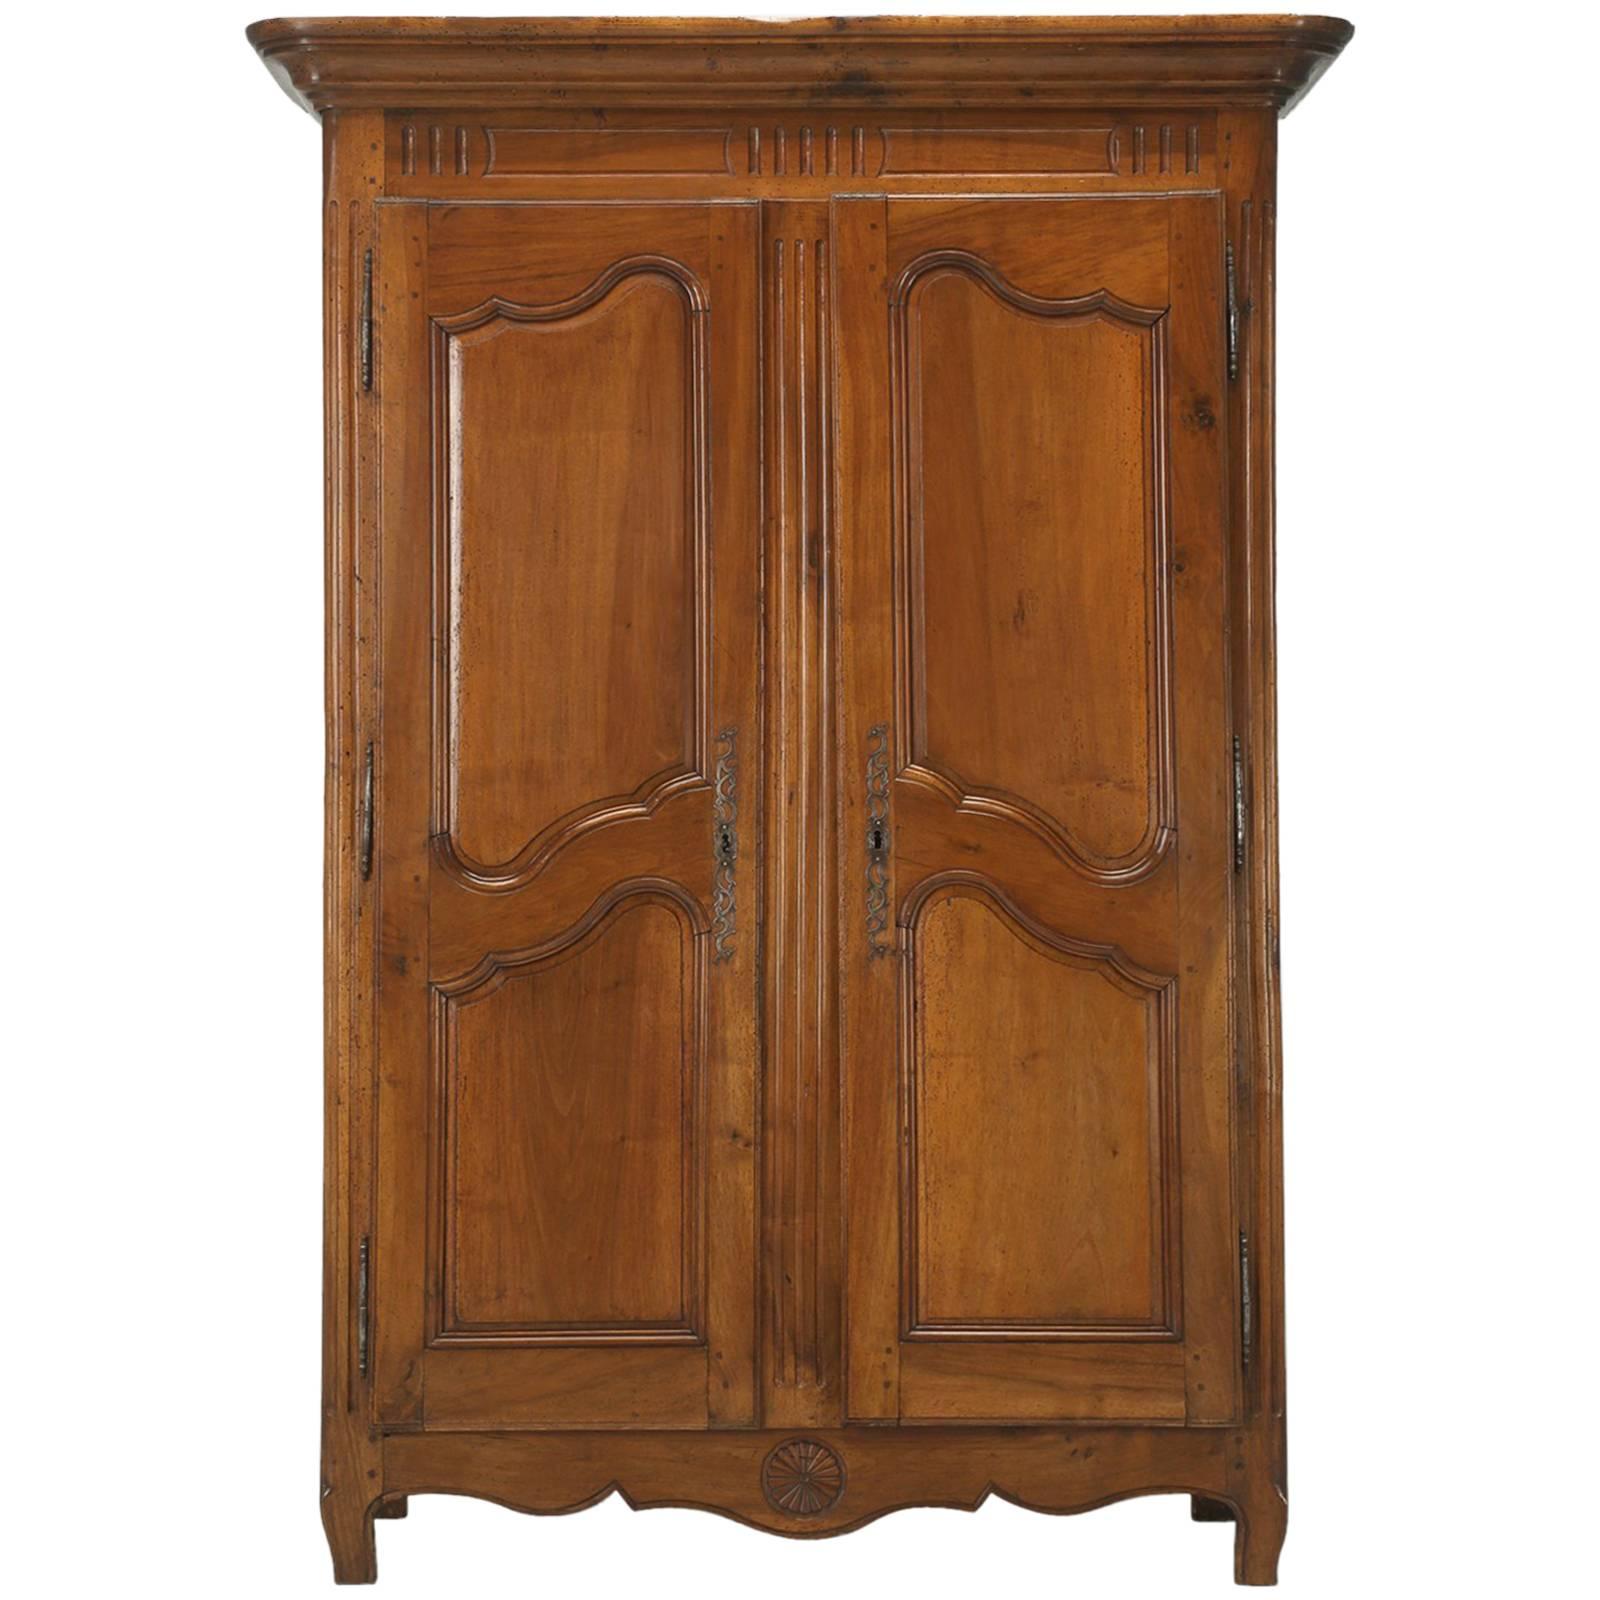 Antique French Armoire Solid Walnut from Toulouse, c1840 Unrestored Condition